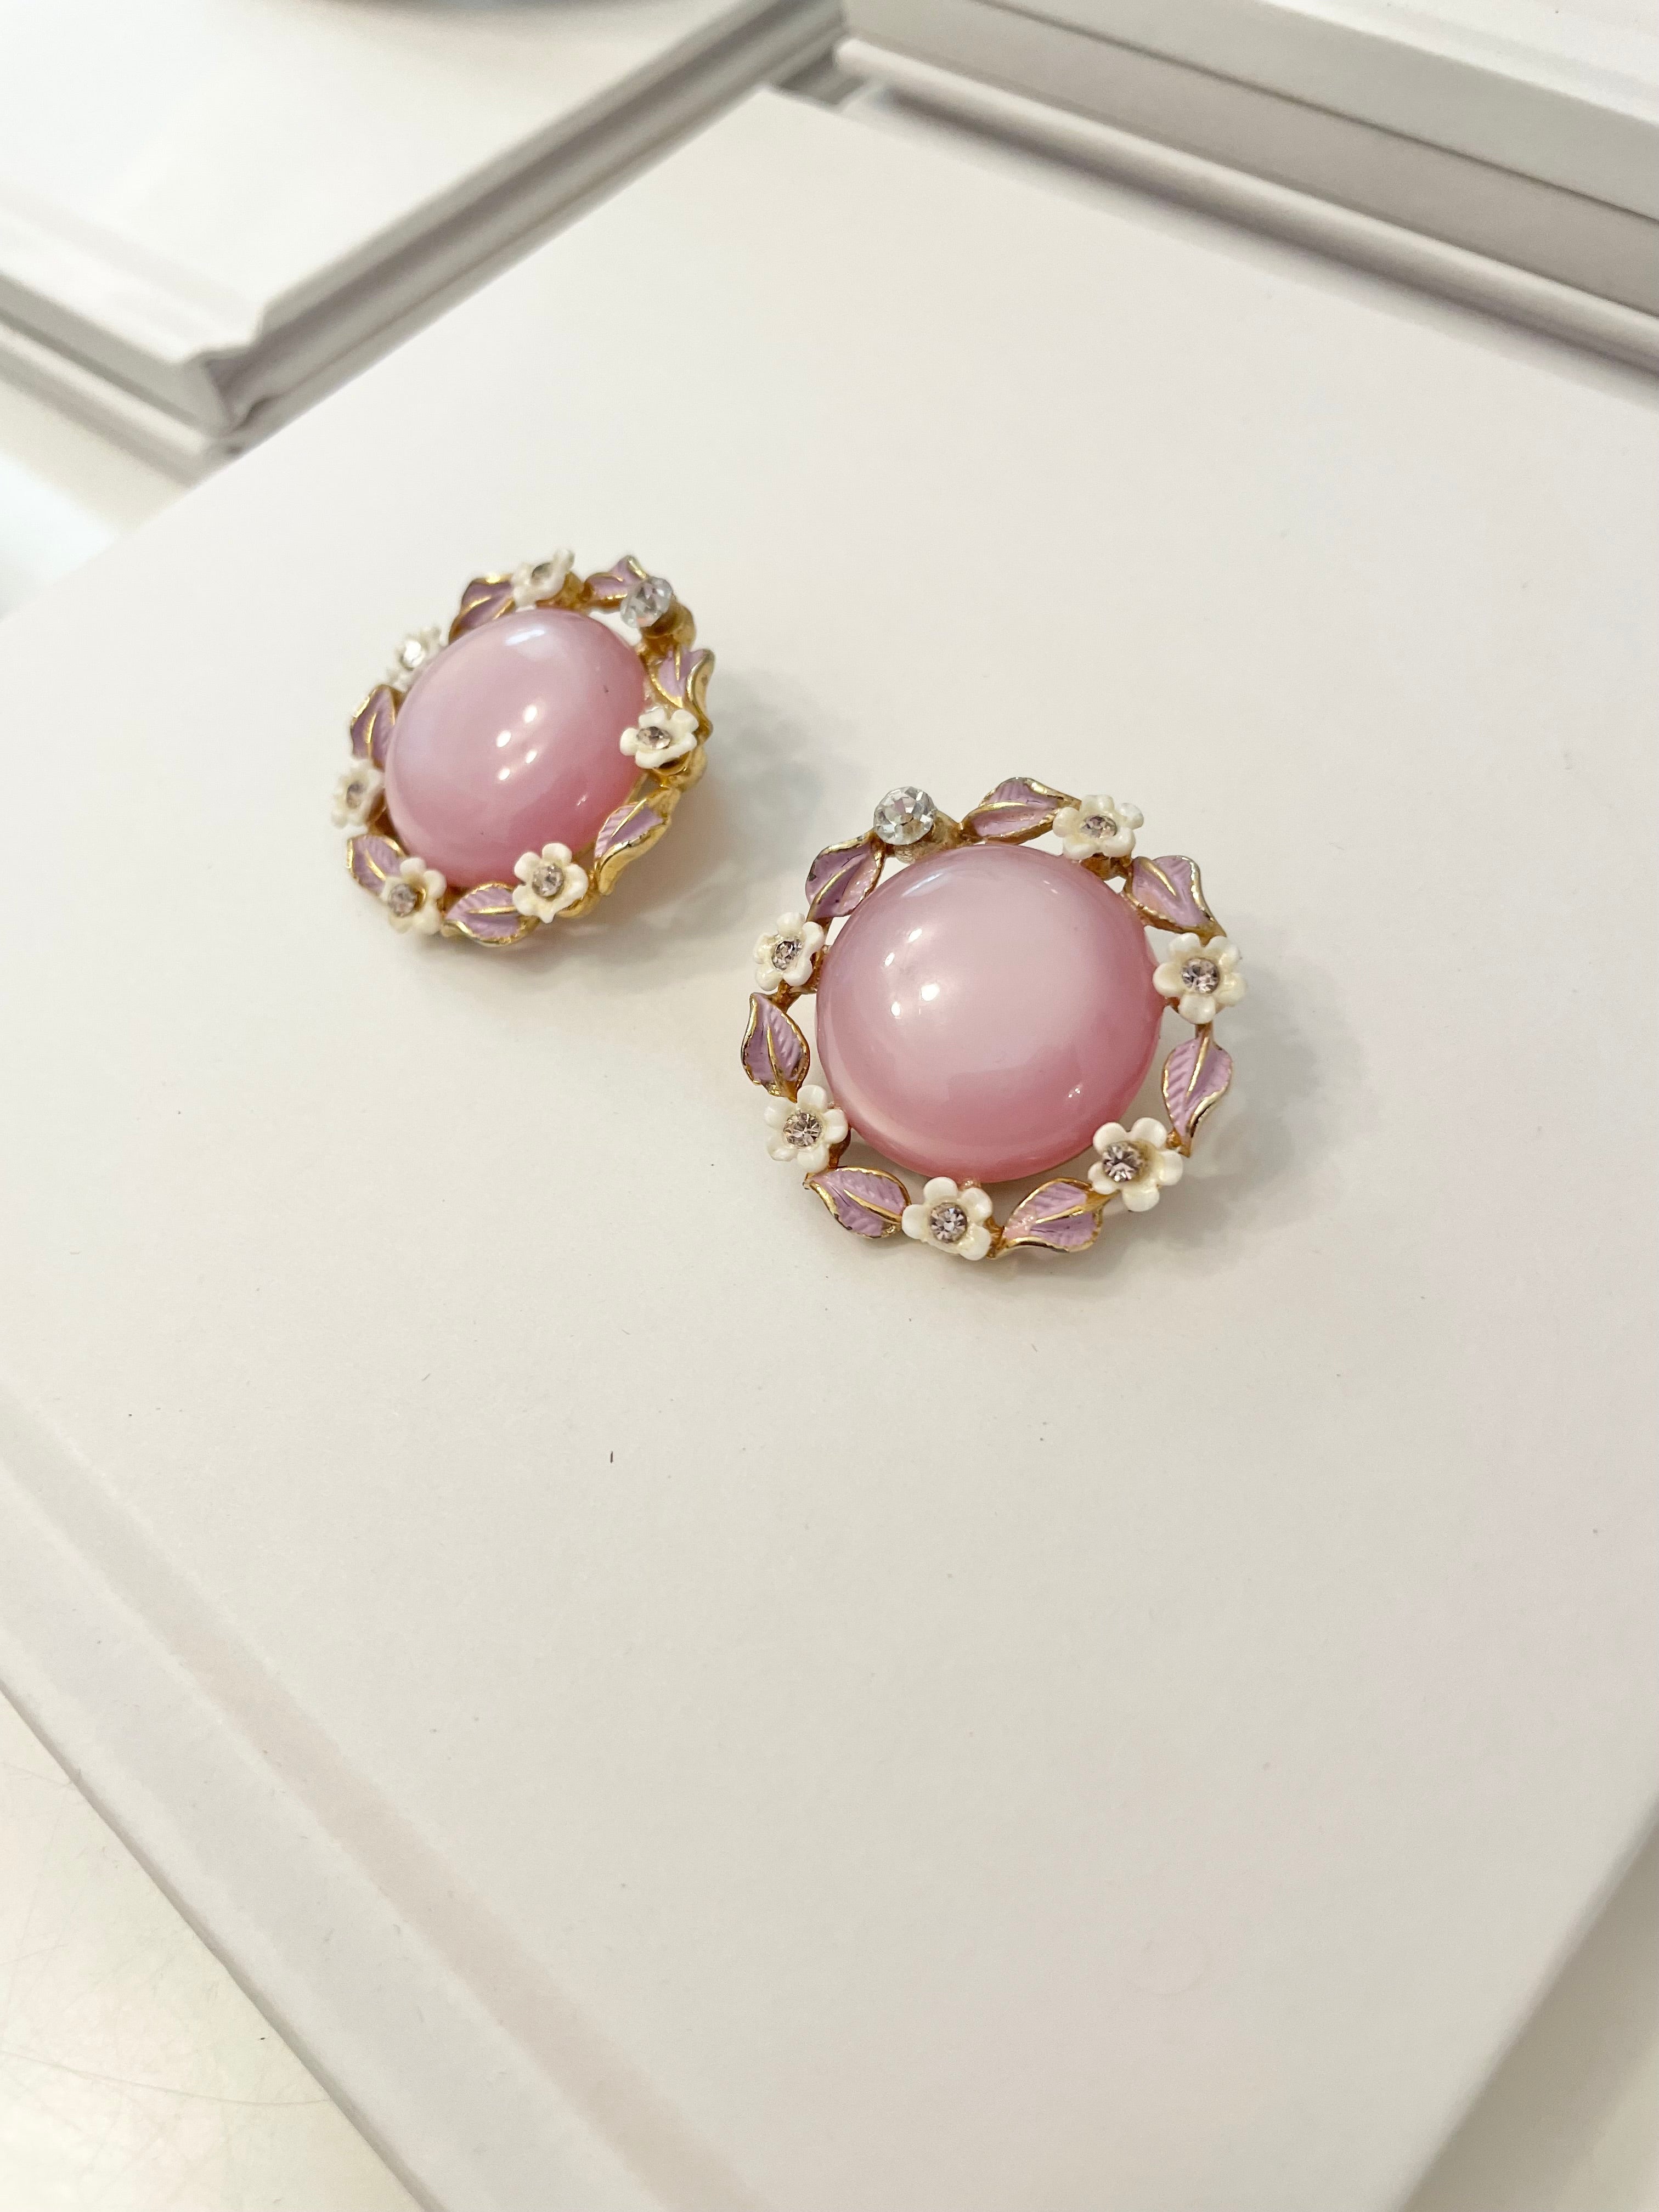 The Flirty Gal and her love of pink. These are so beautiful, soft moon glow flower earrings are truly delightful.